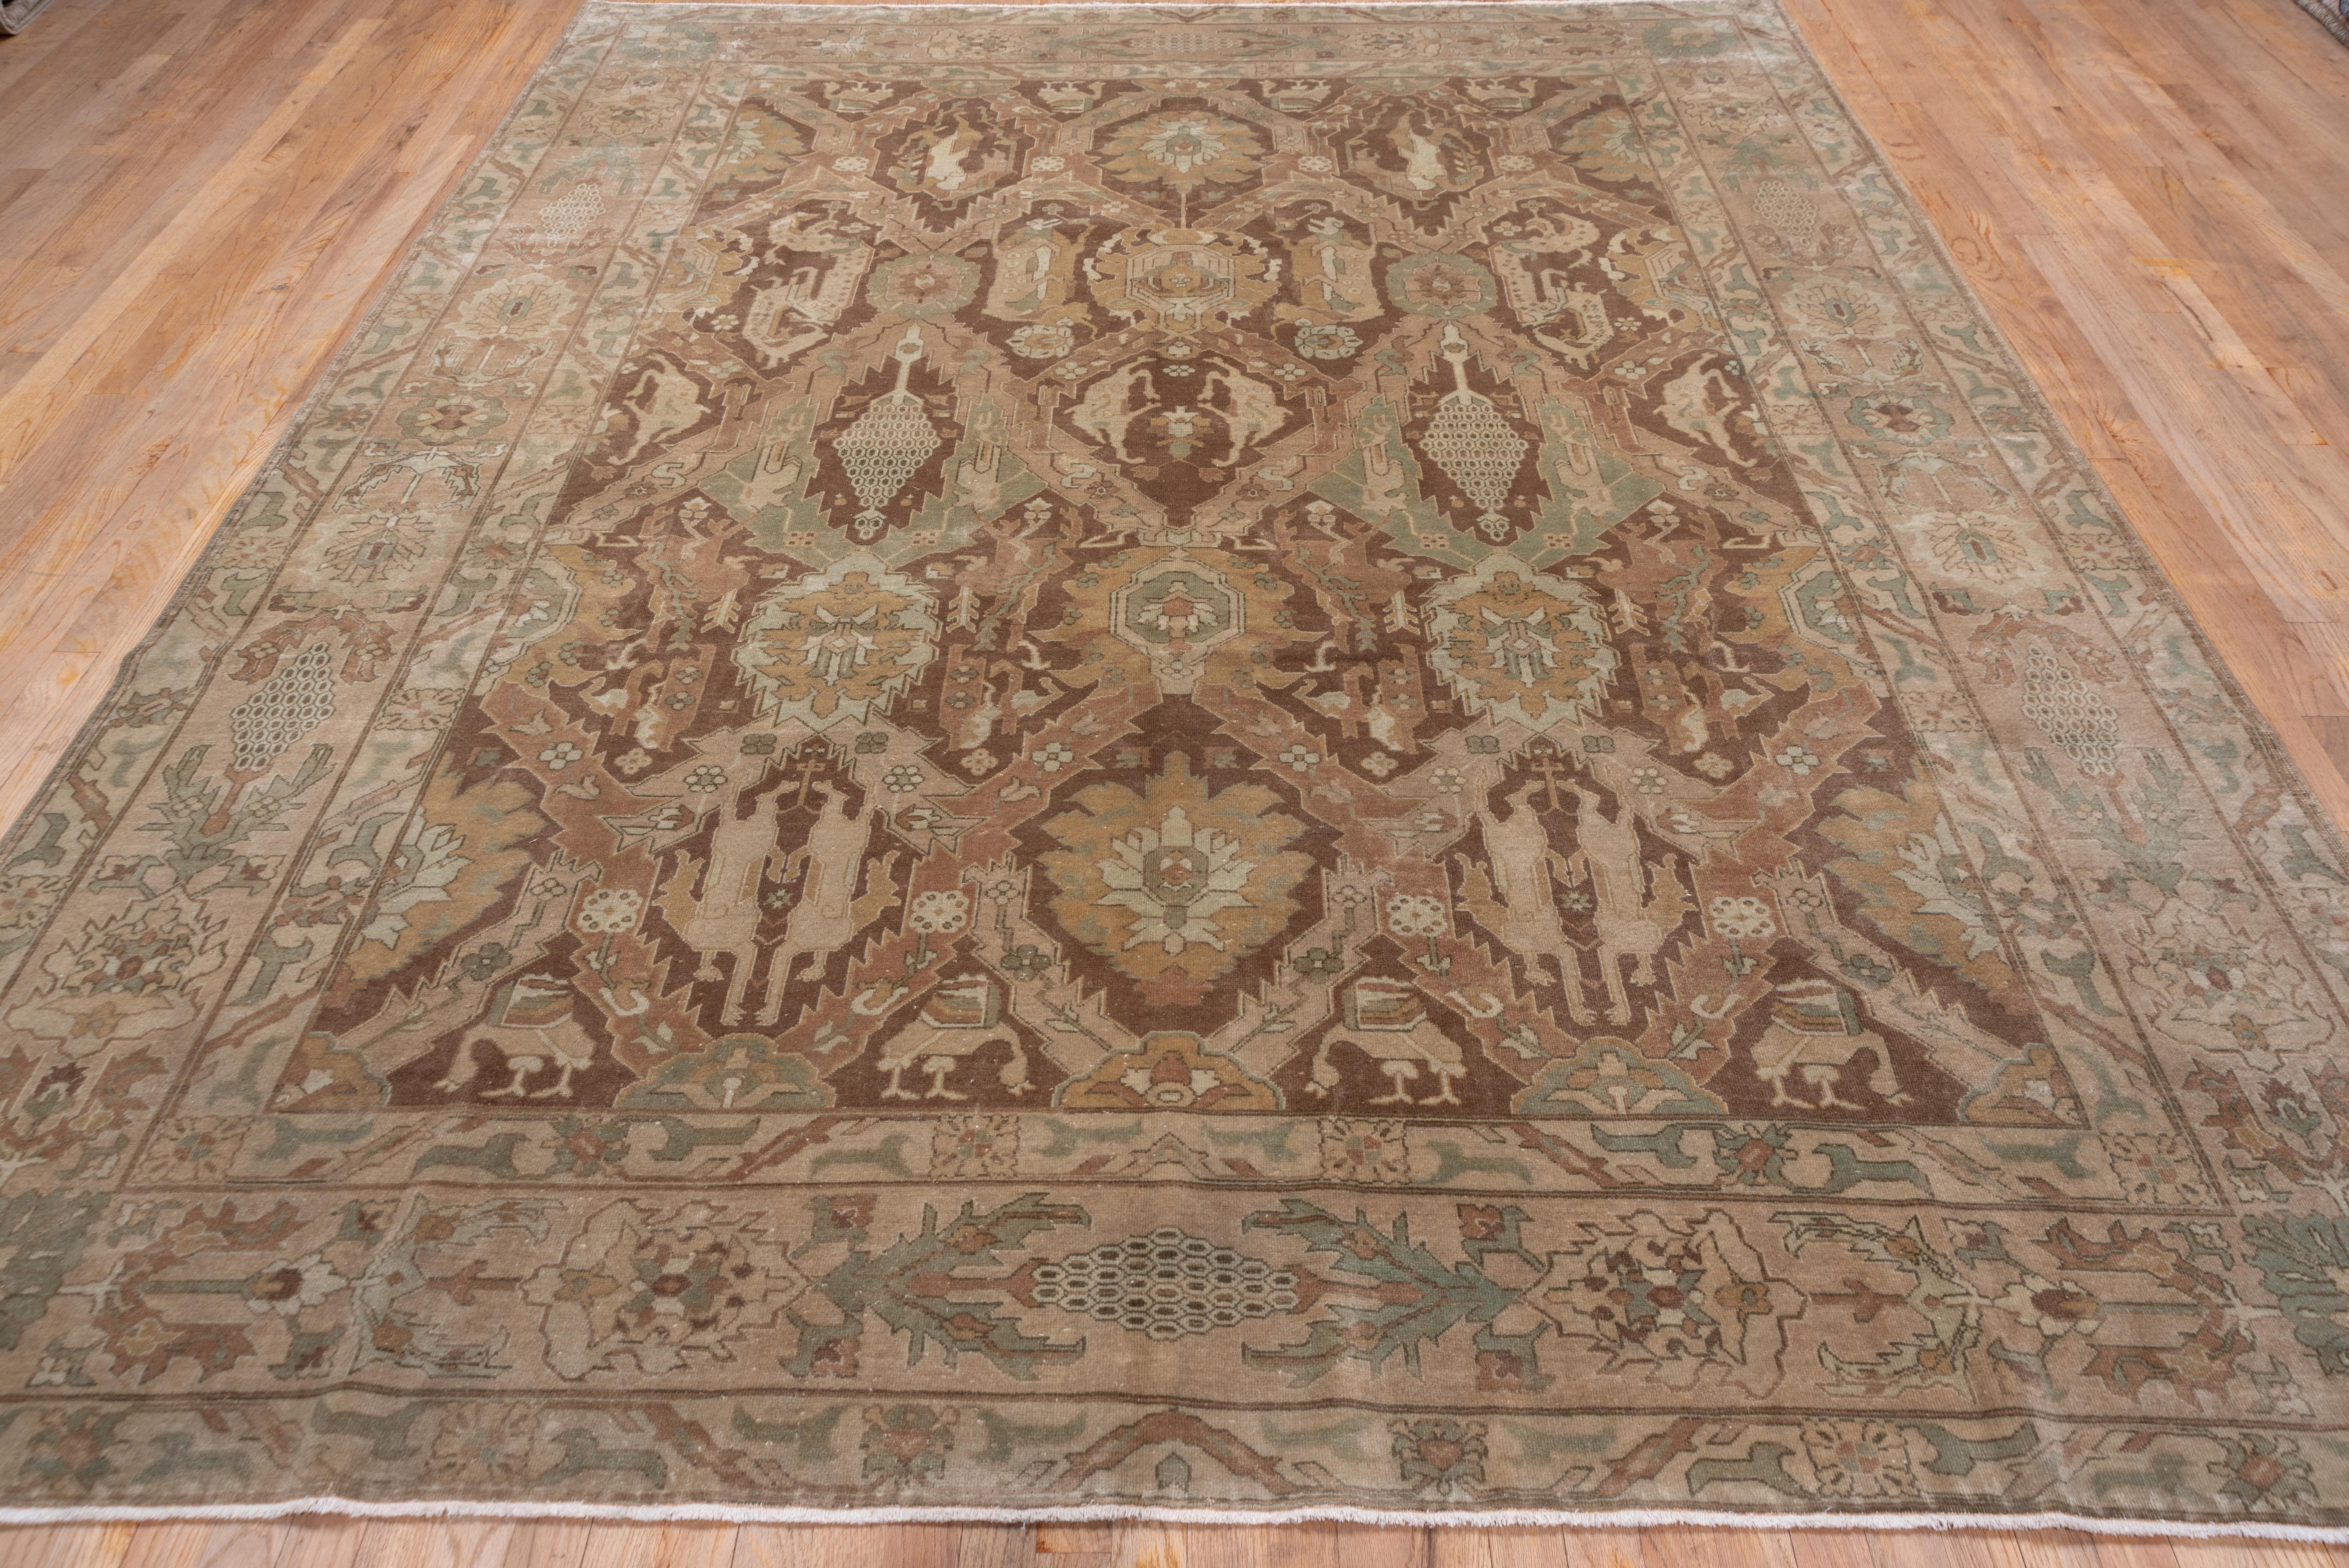 Early 20th Century Unusual Antique Turkish Sivas Rug, Brown and Green Tones, Dragon Design For Sale